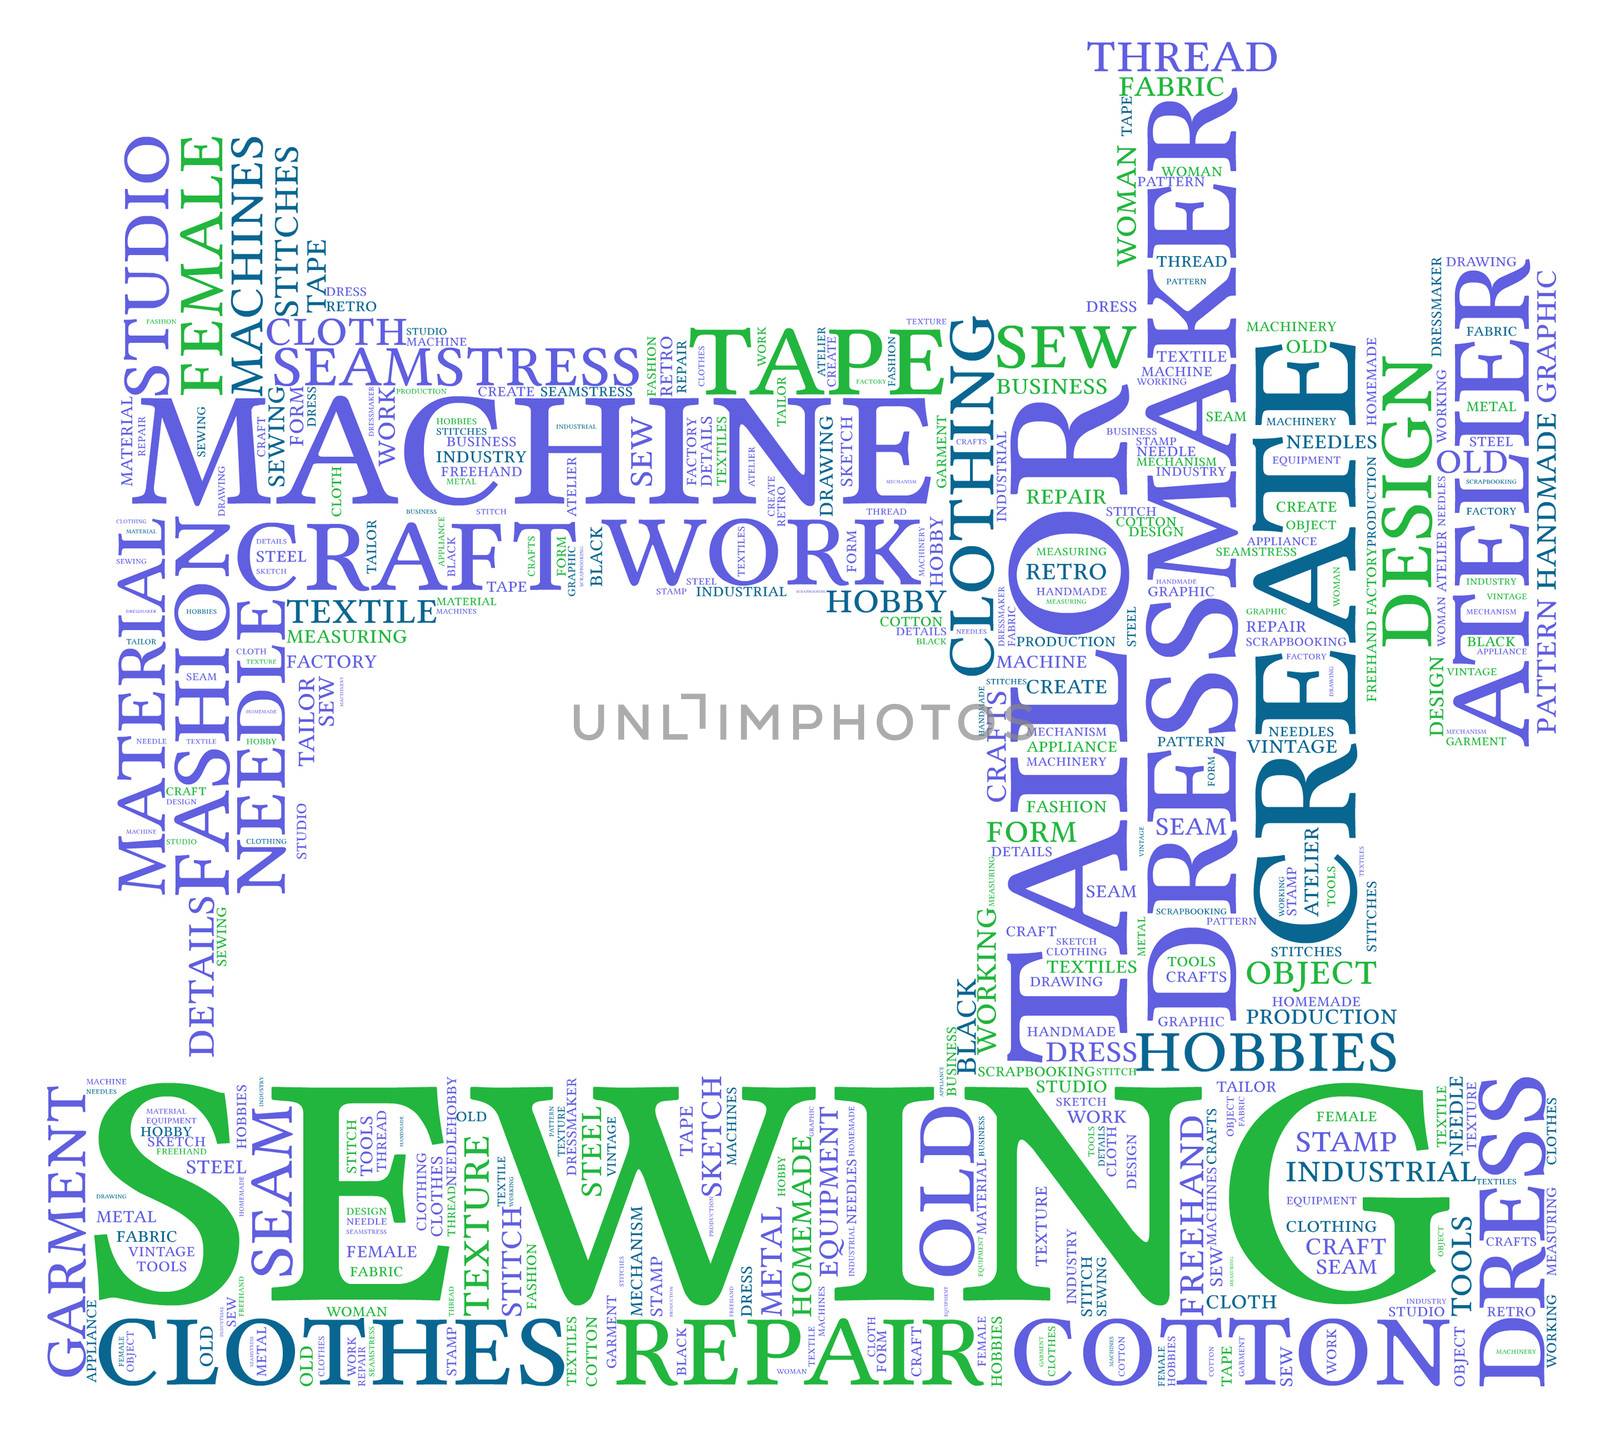 Sewing machine tag cloud illustration by lifeinapixel